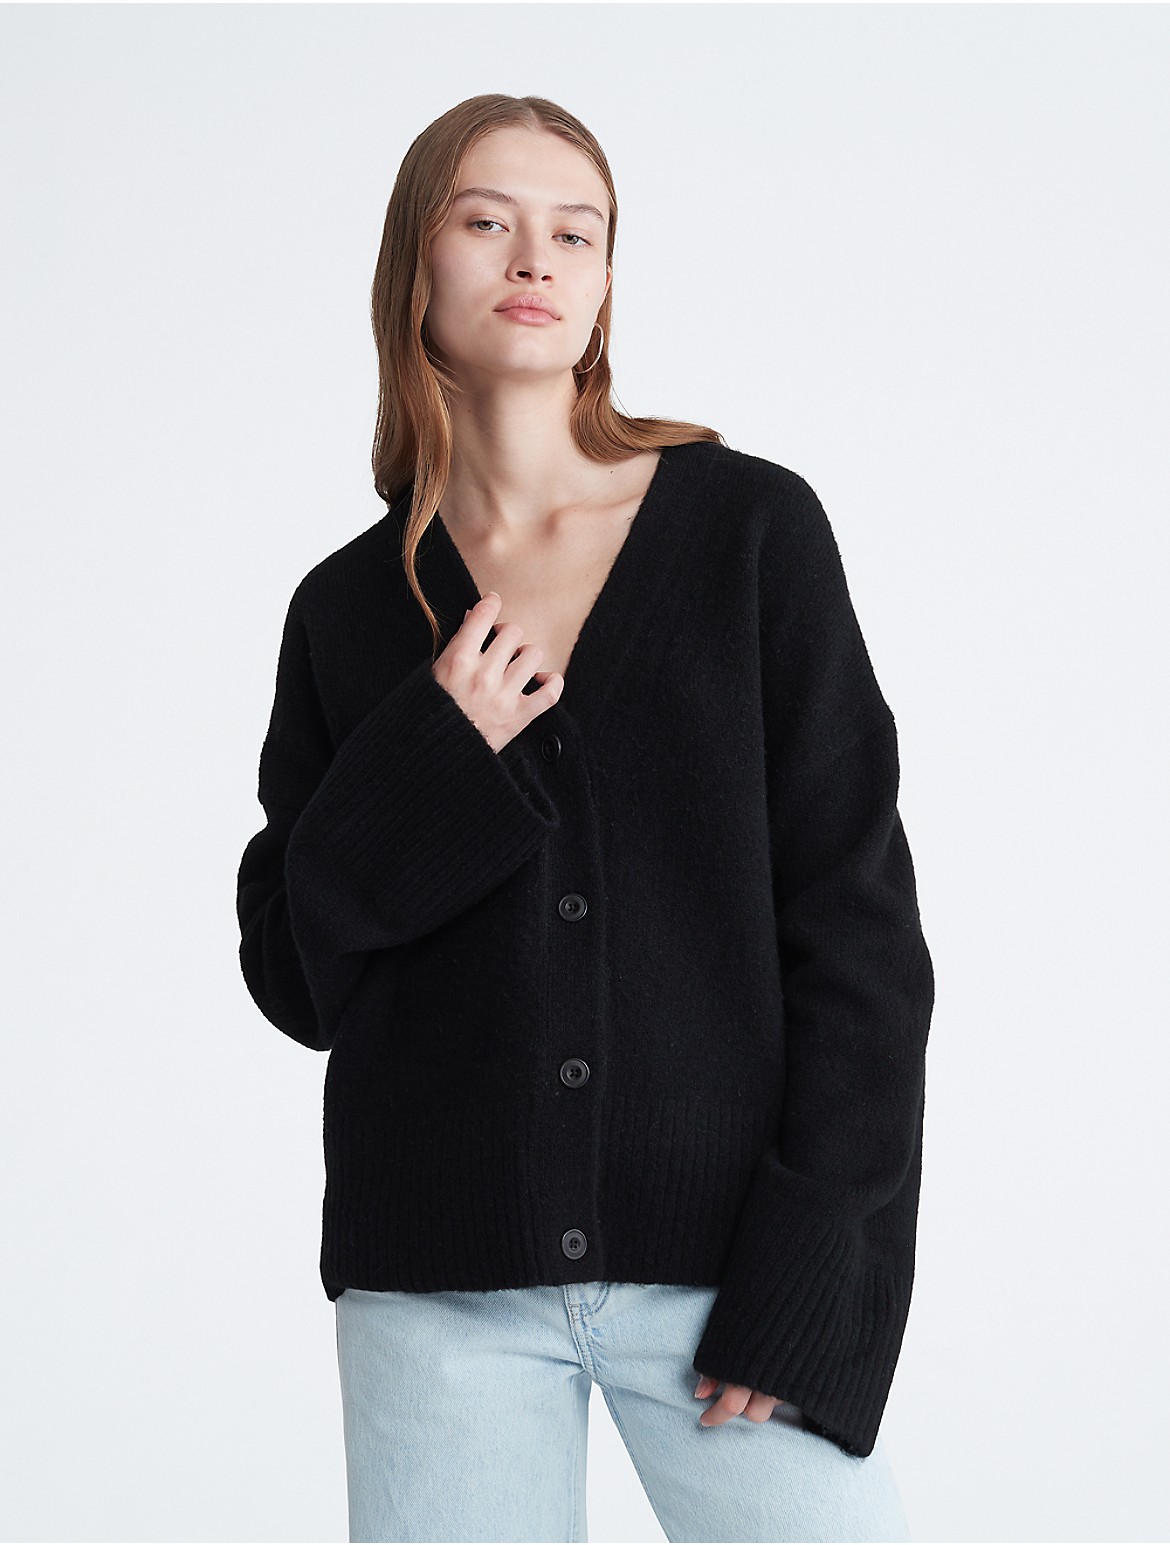 Calvin Klein Women's Oversized Relaxed Fit Cardigan - Black - XS